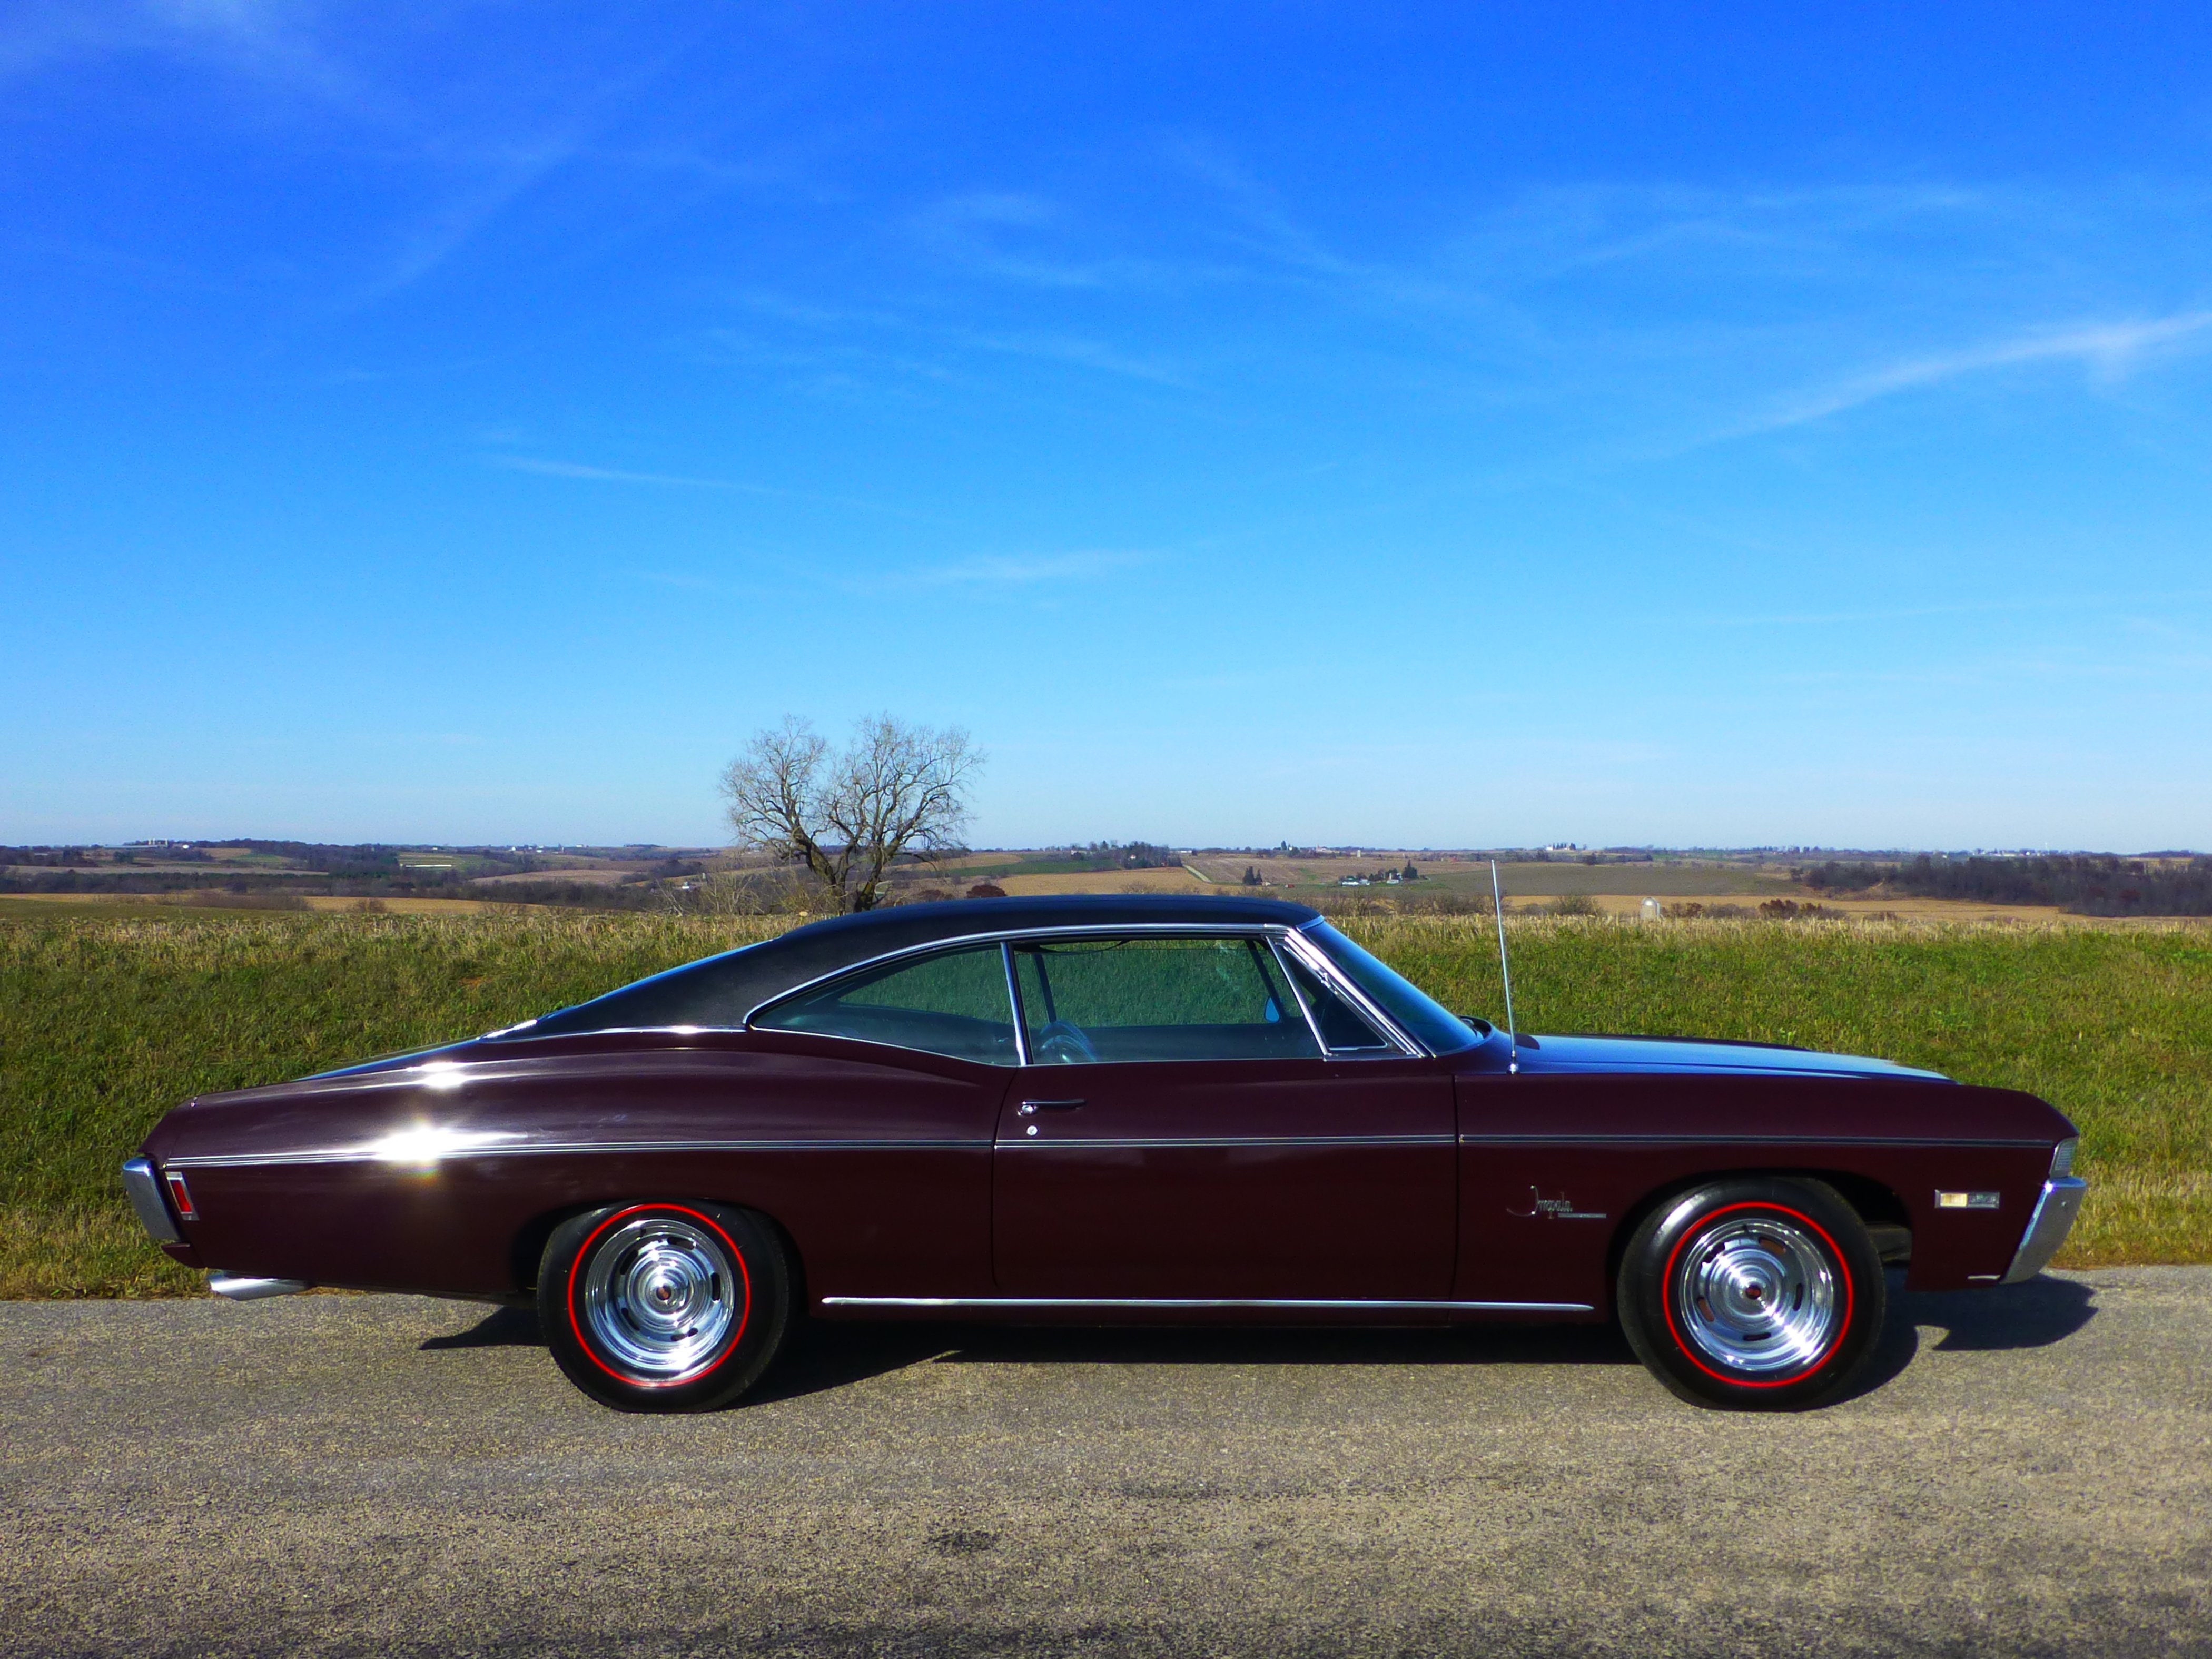 1968, Chevrolet, Impala, Ss, Coupe, Hardtop, Muscle, Classic, Usa, 4200x3150 02 Wallpaper